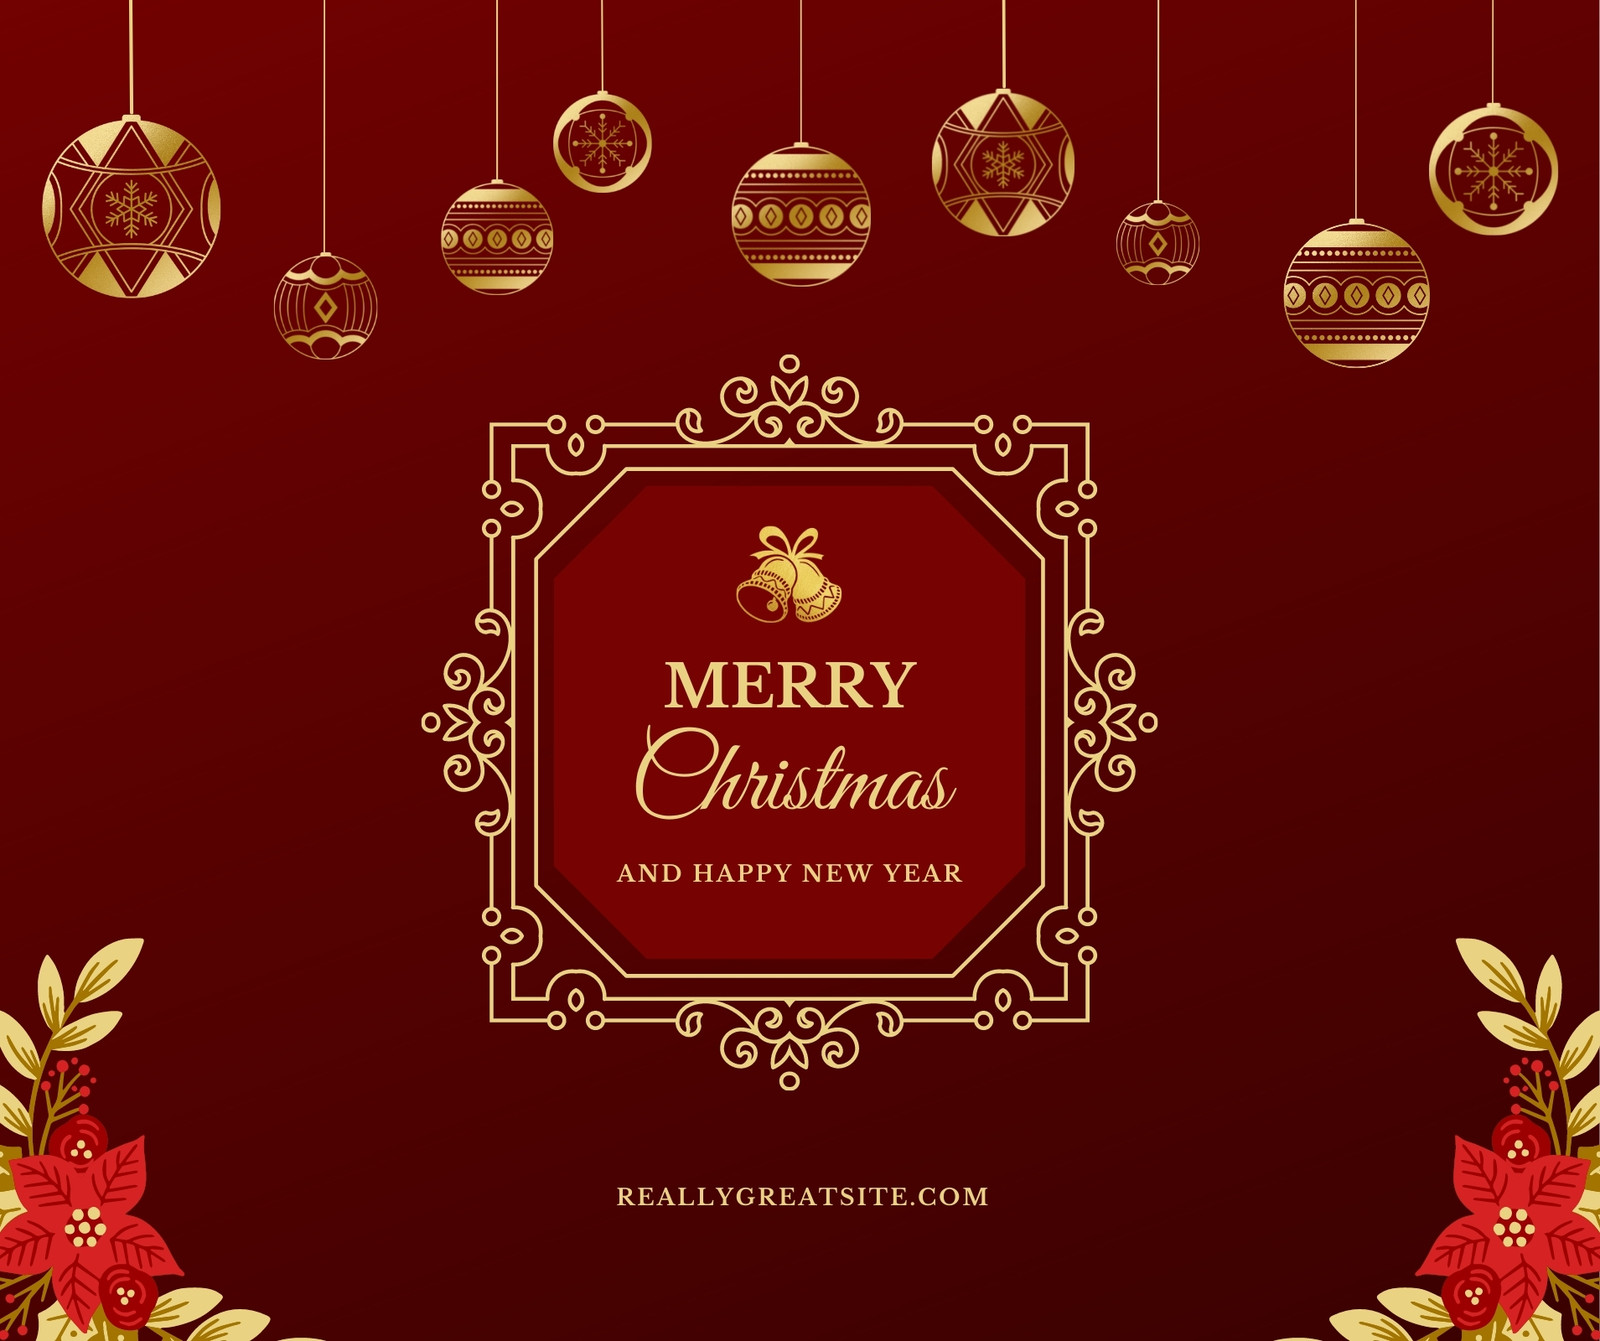 Page 2 - Free customizable Christmas Facebook post templates | Canva